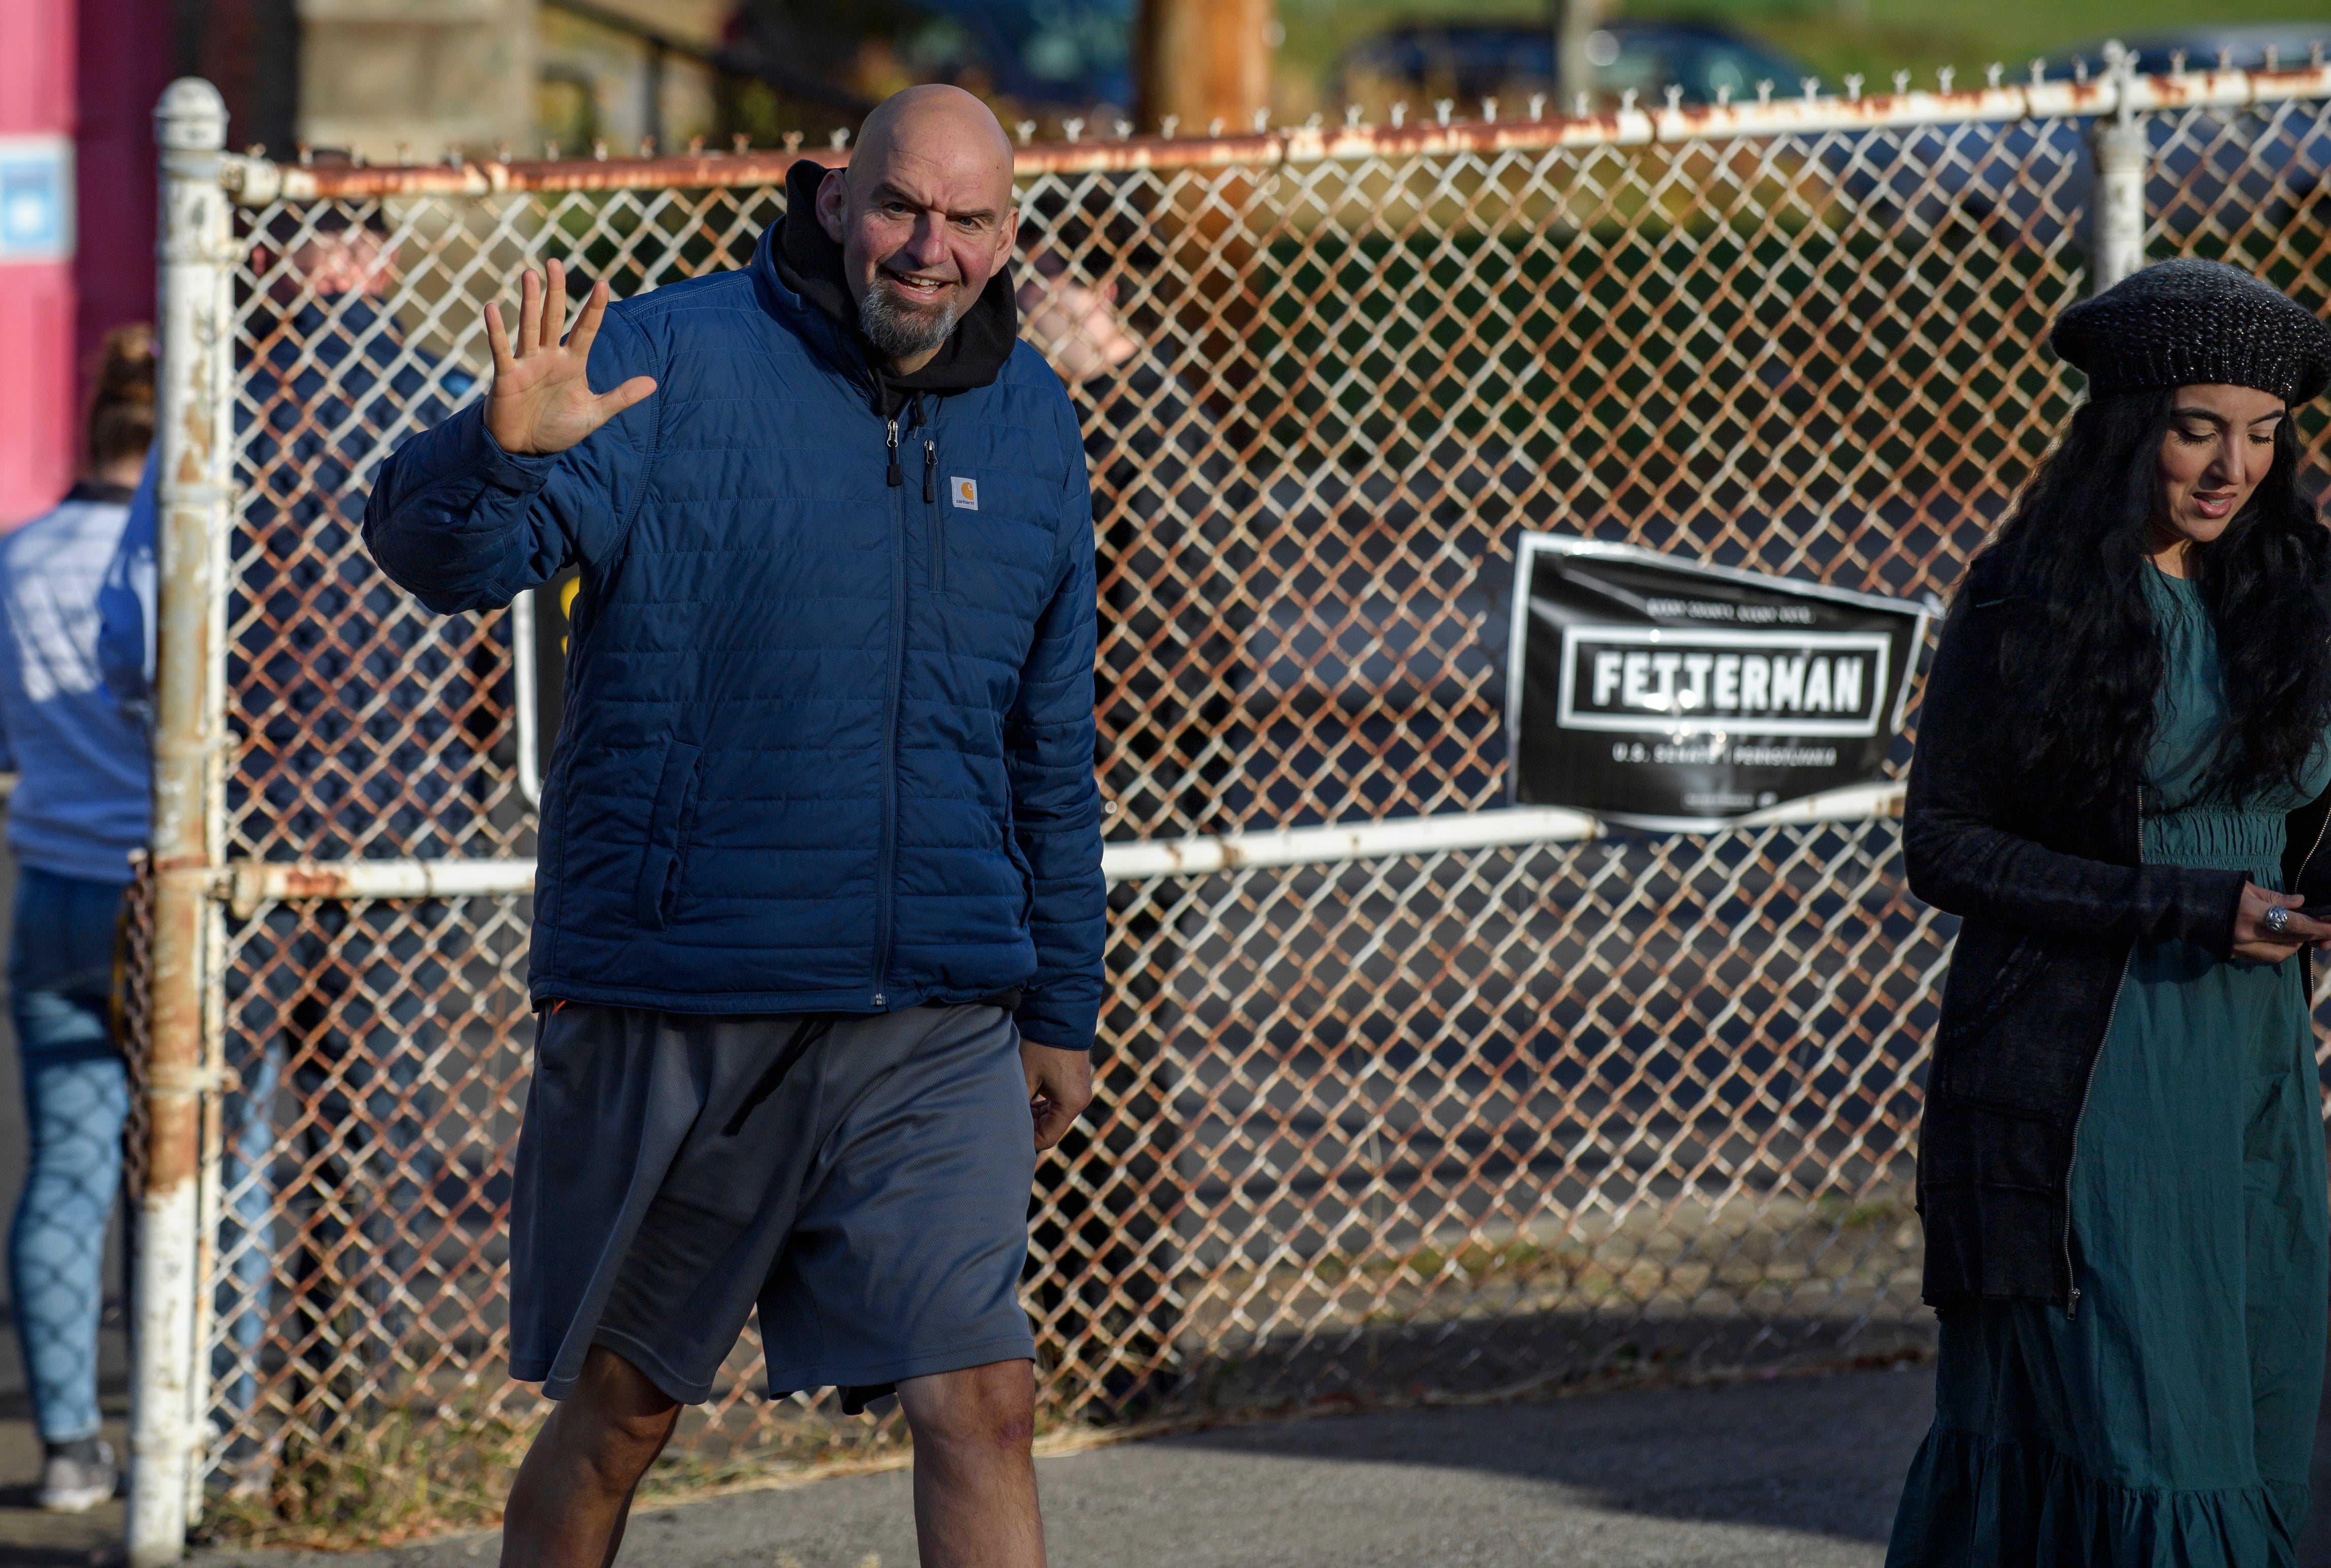 BRADDOCK, PA - NOVEMBER 08: Pennsylvania Democratic Senate candidate John Fetterman and his wife, Gisele, walk into their polling place to cast their votes at the New Hope Baptist Church on November 8, 2022 in Braddock, Pennsylvania.